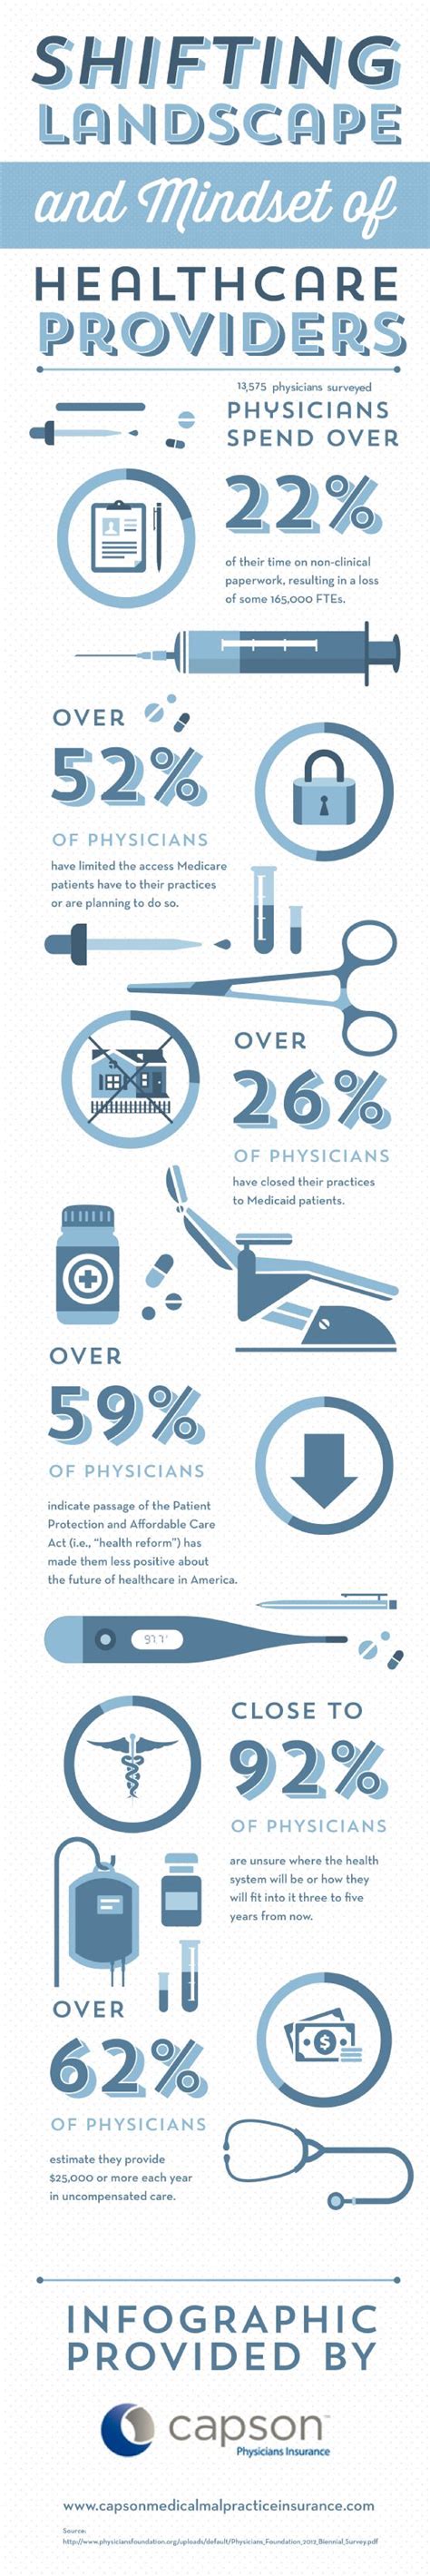 More Than Half Of Physicians Have Already Limited Or Plan To Limit The